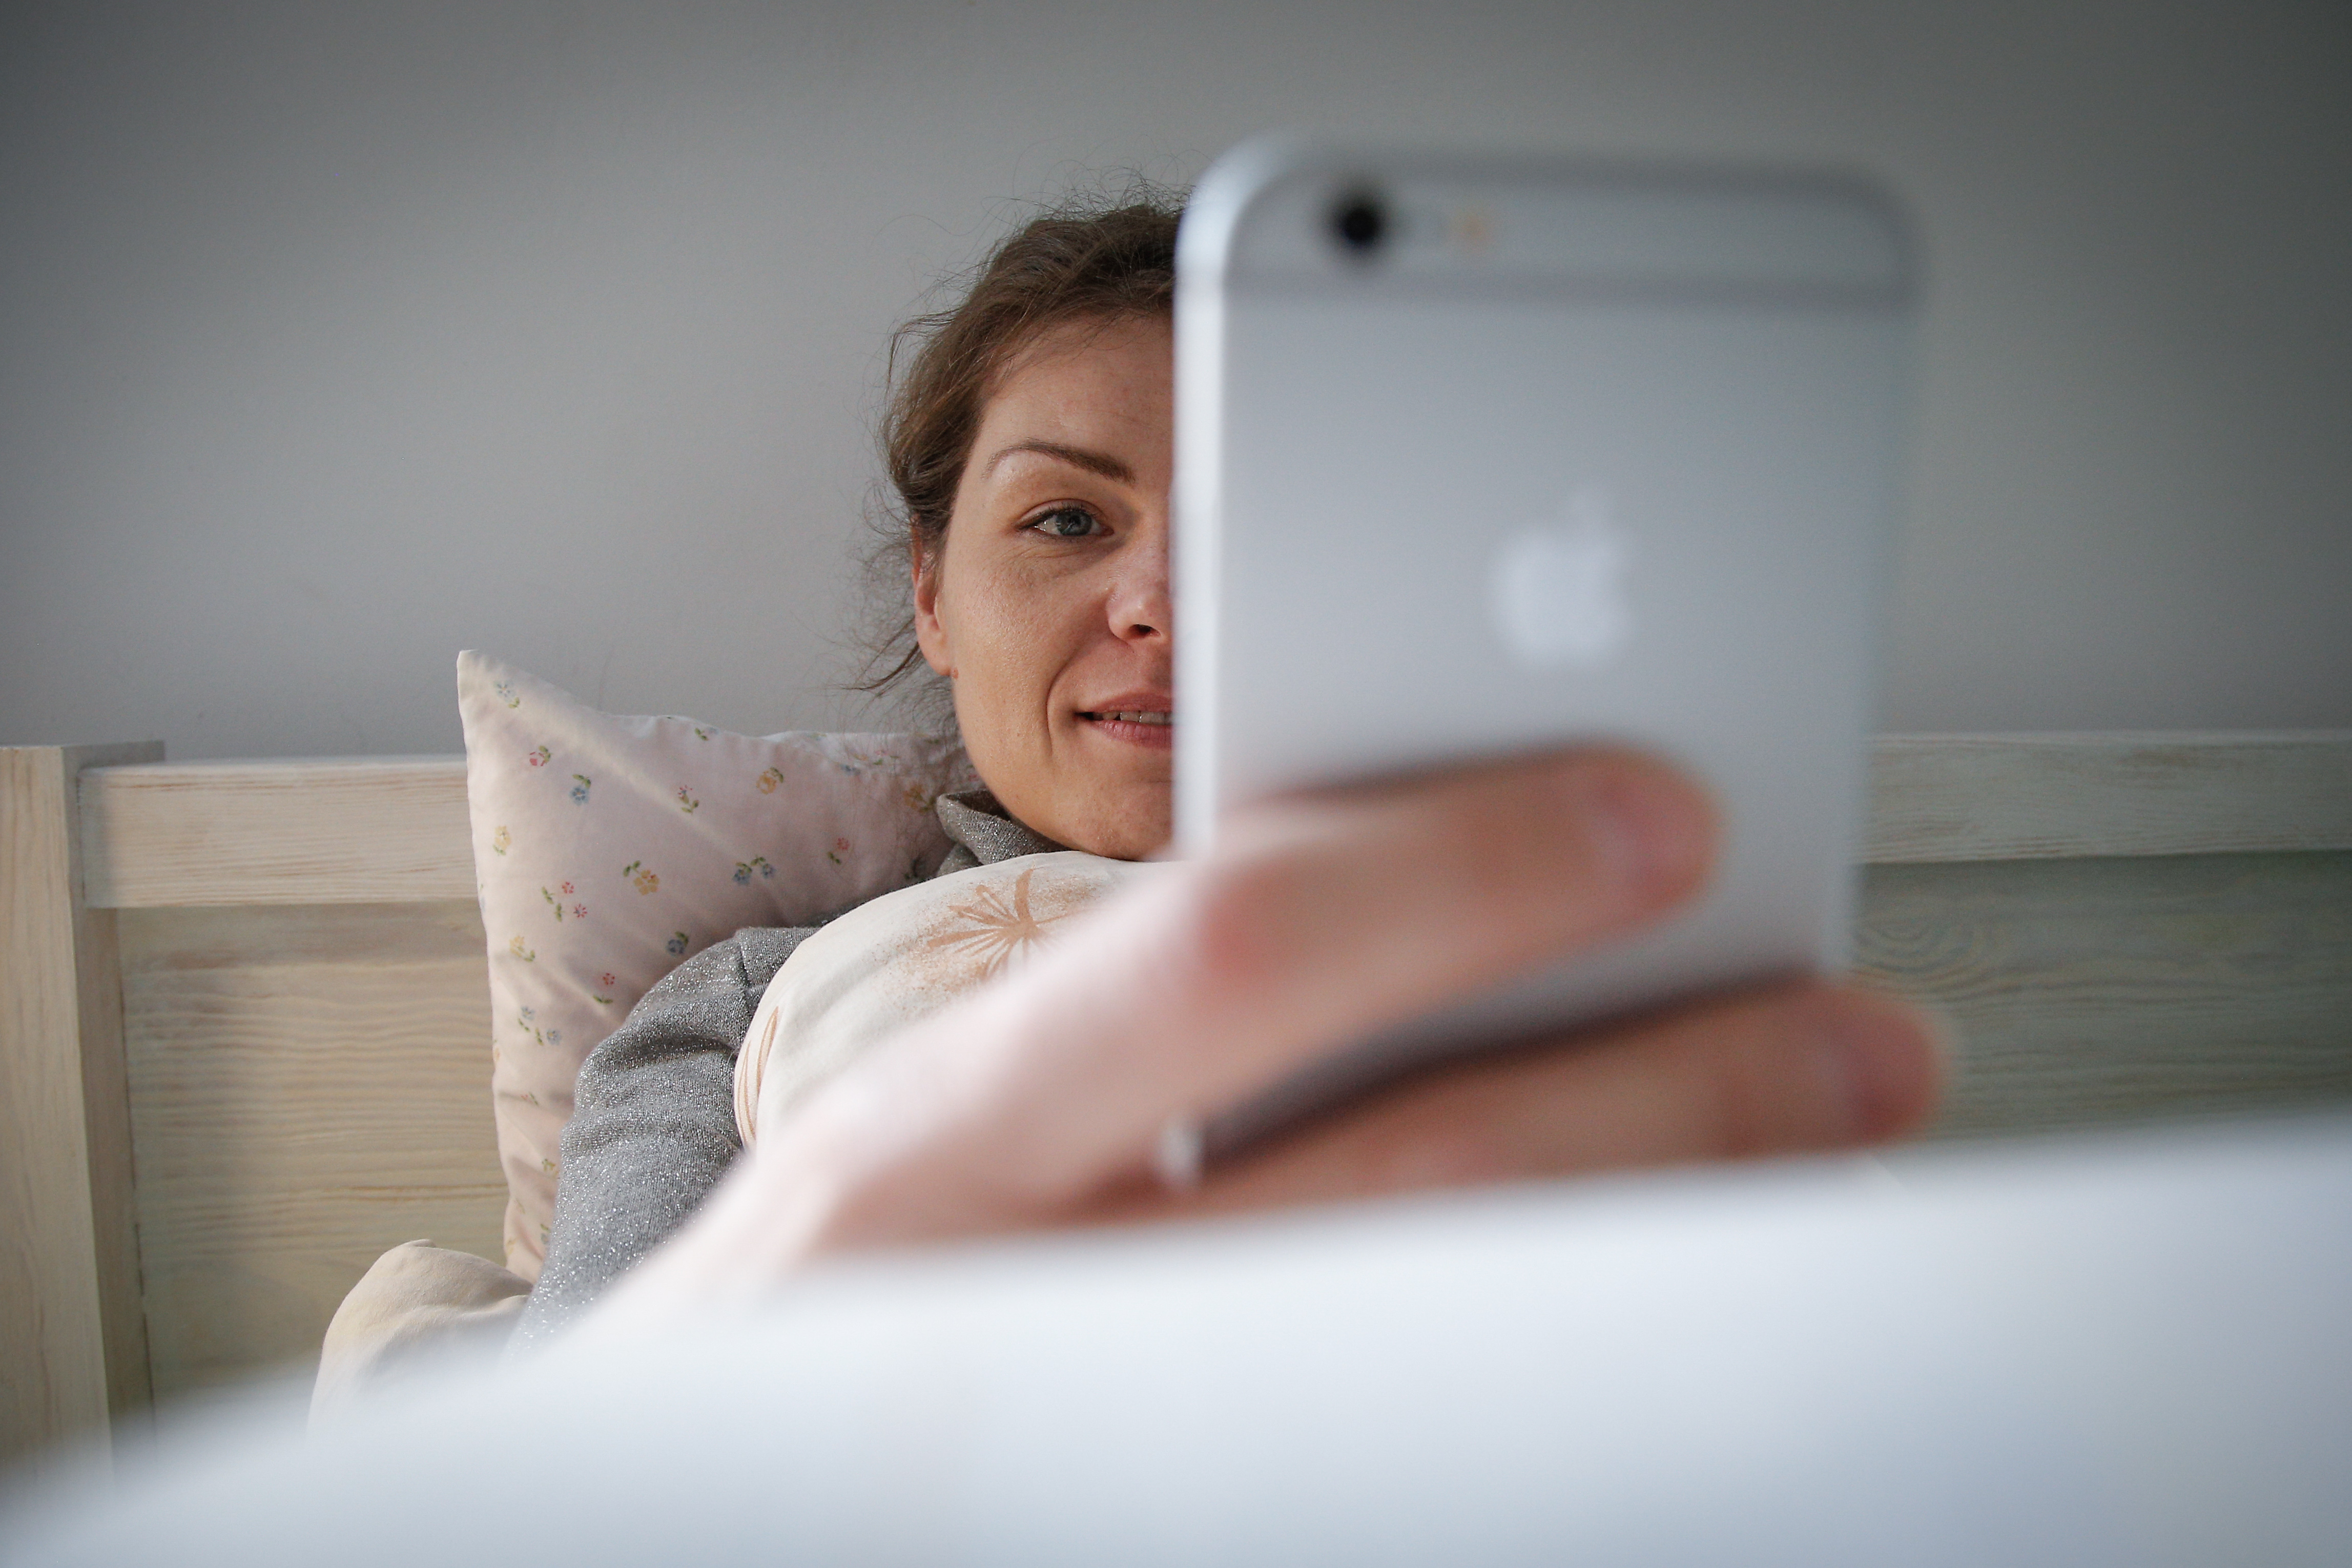 A woman sits in bed, holding her iPhone in front of her face, smiling for the camera.